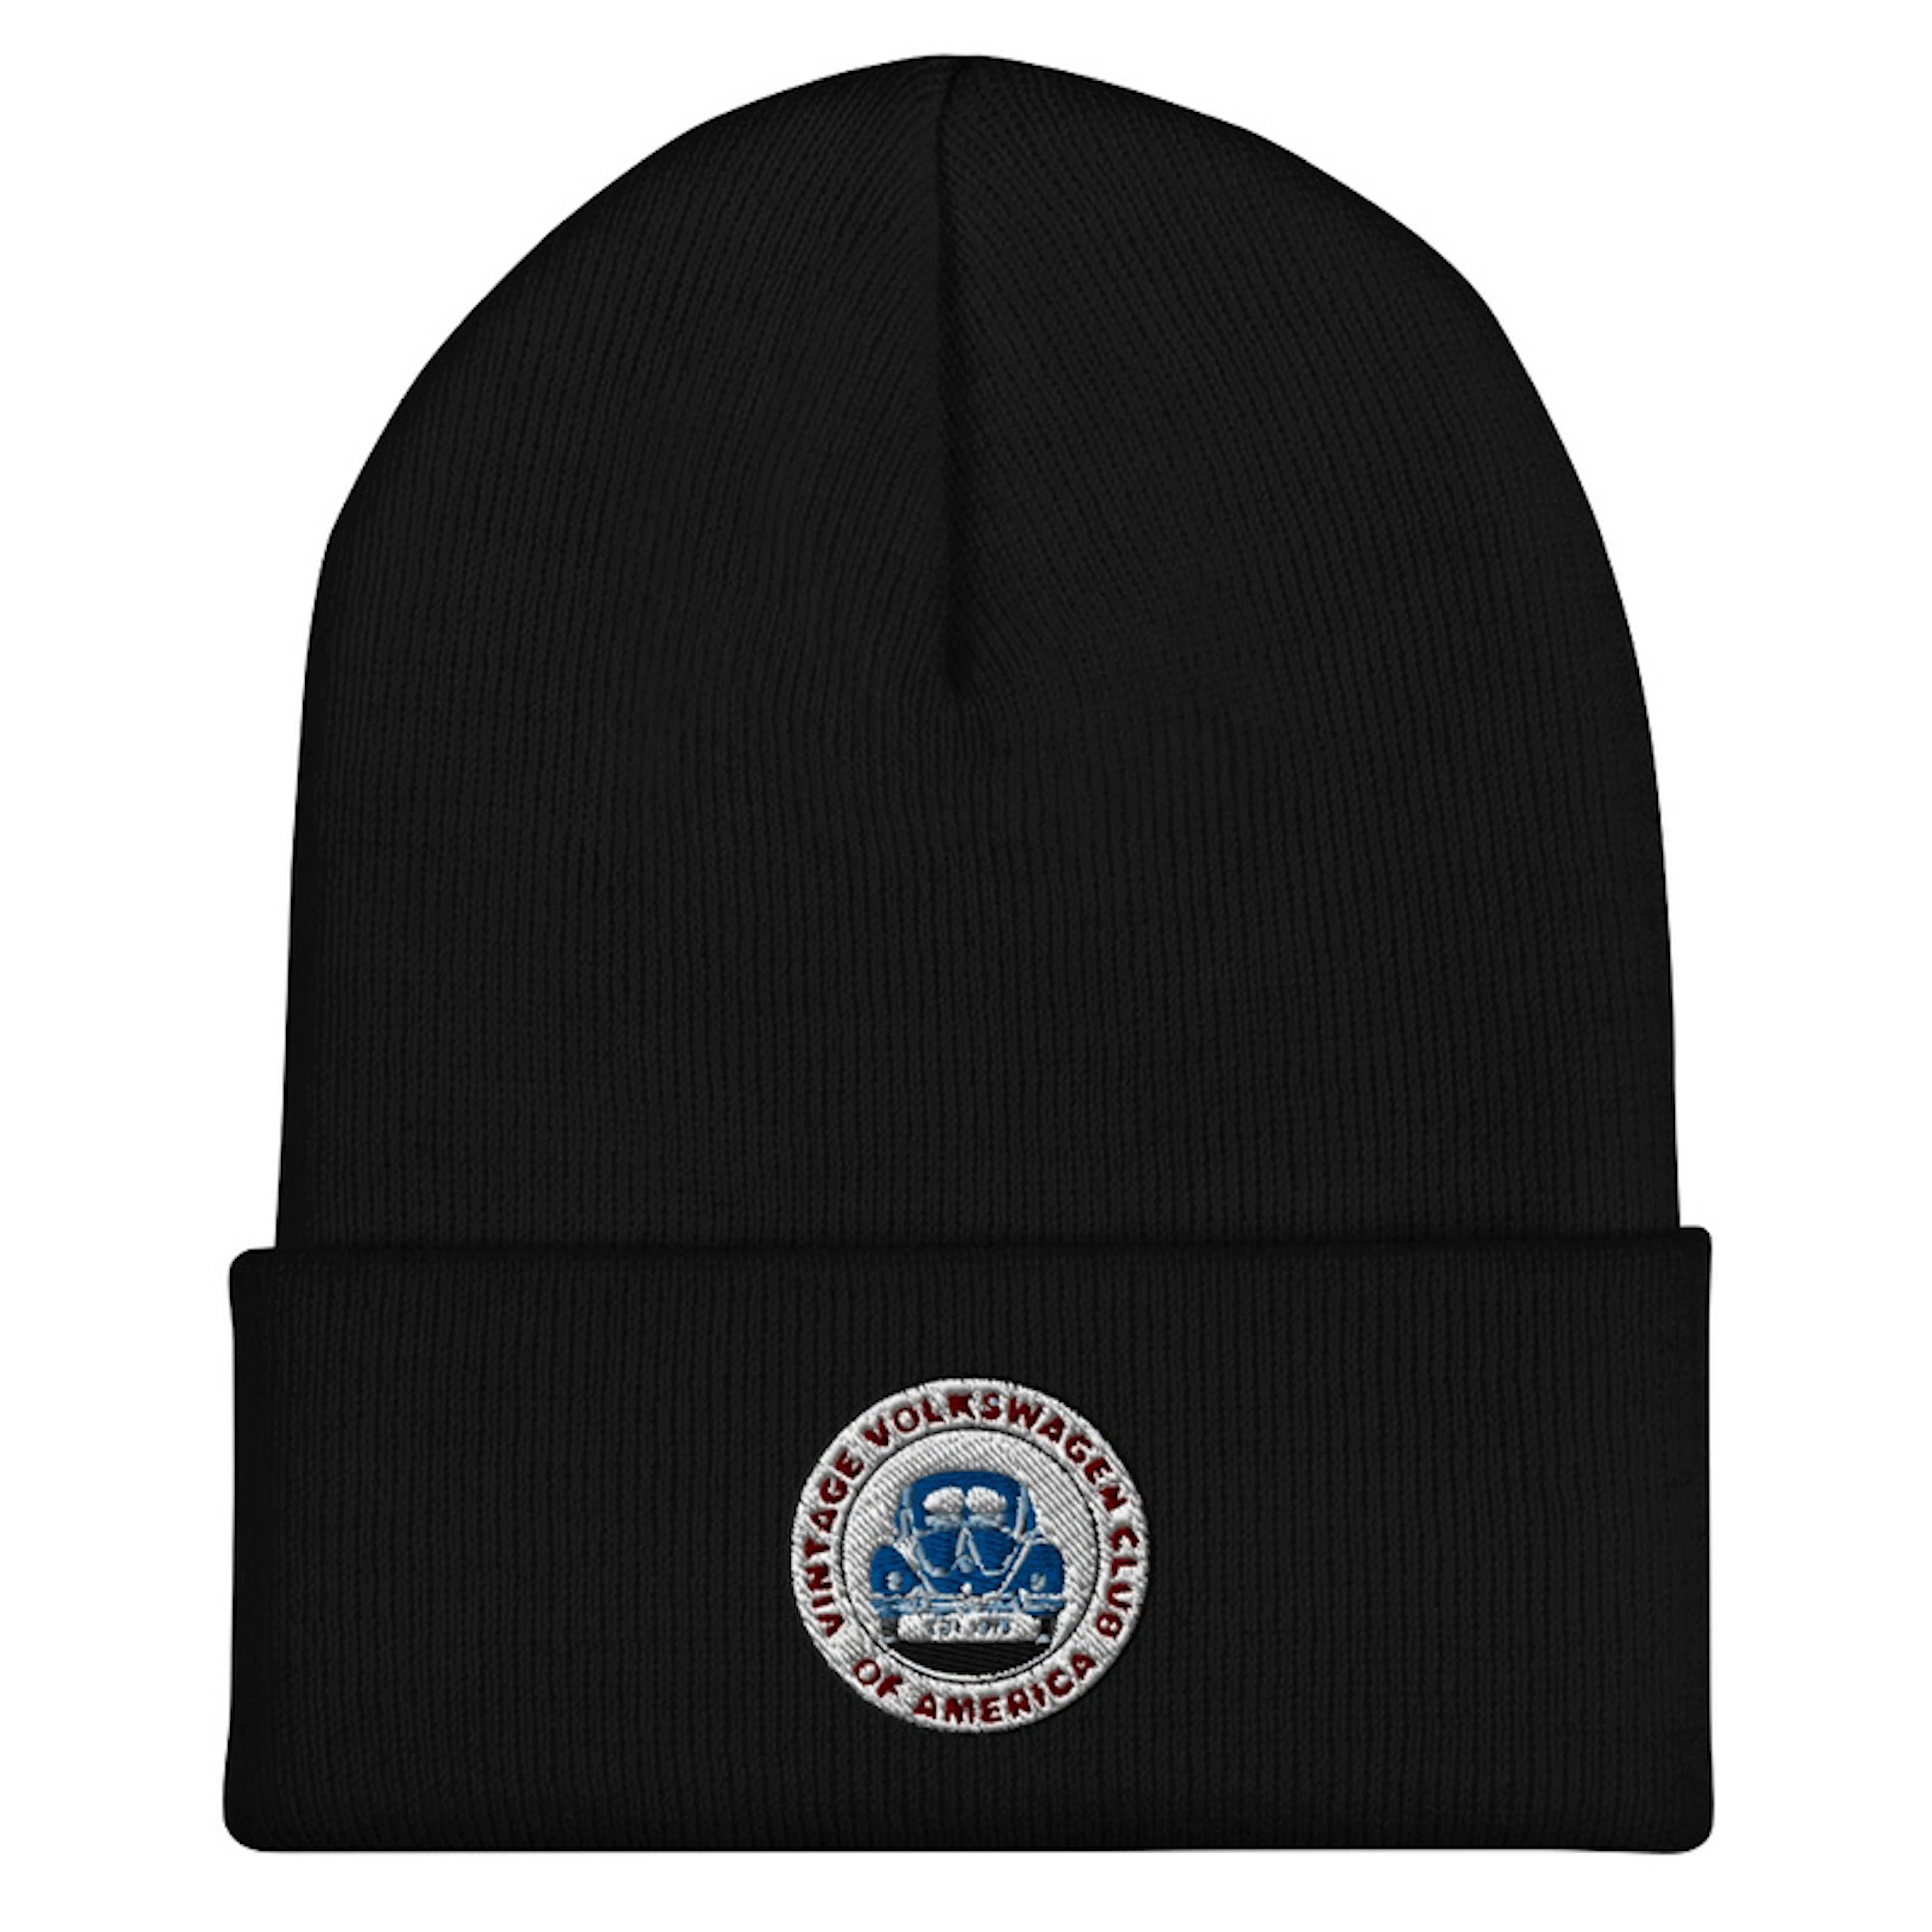 Official VVWCA beanie stock hat